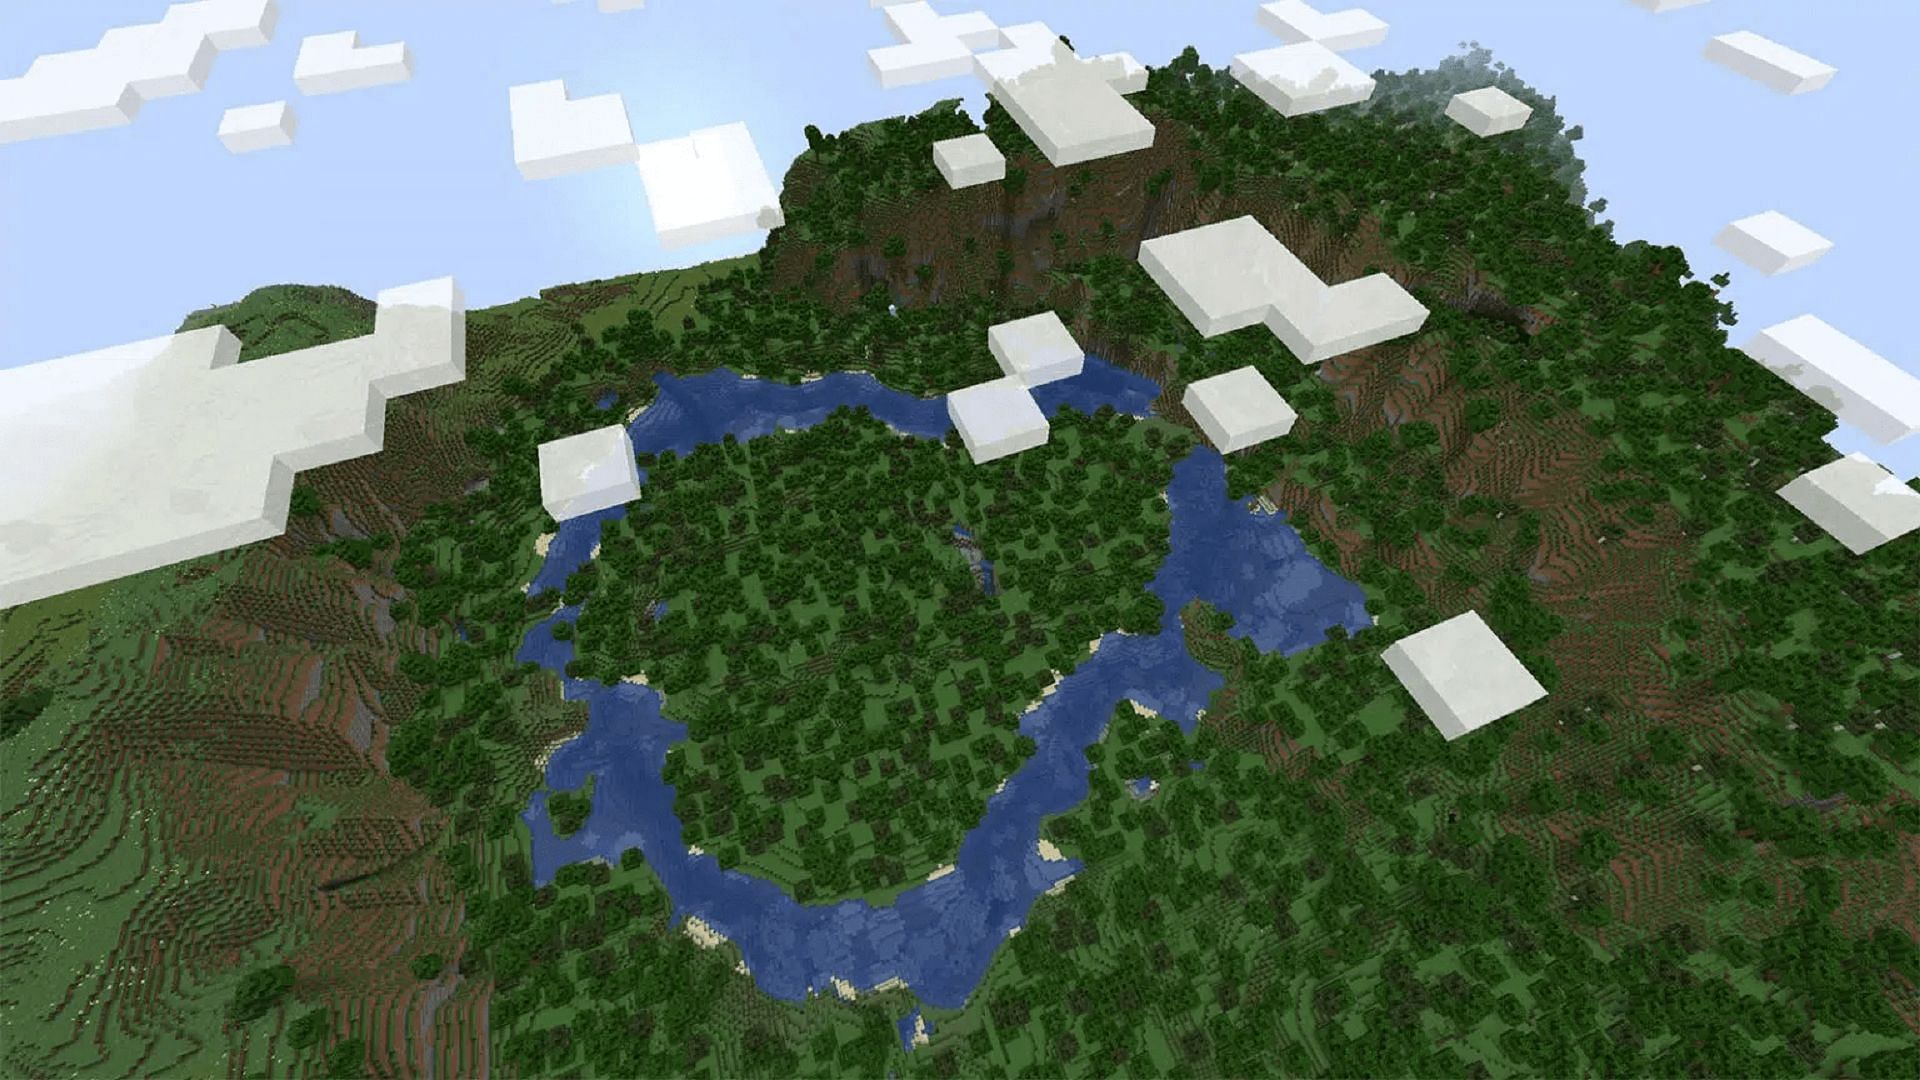 This seed&#039;s river makes a perfect moat for a castle (Image via Mojang)